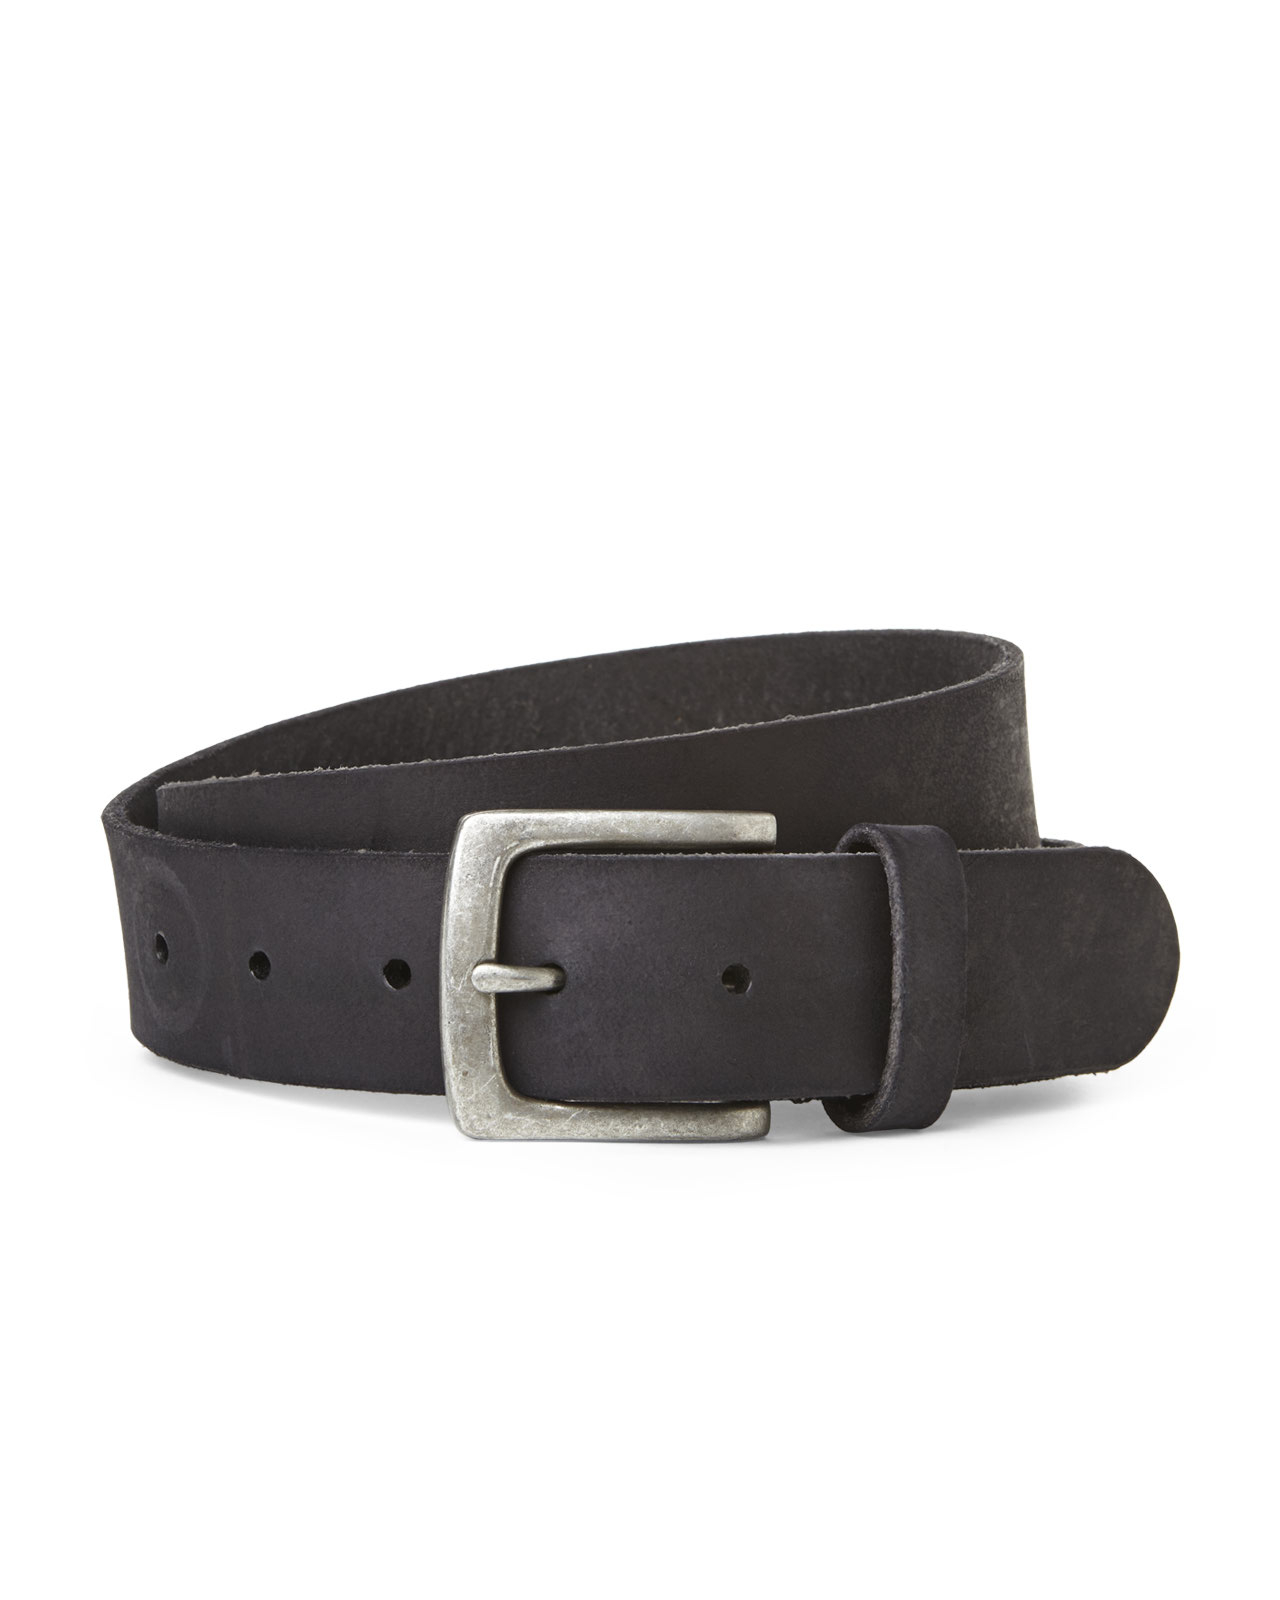 Lyst - Timberland Oil Leather Belt in Black for Men